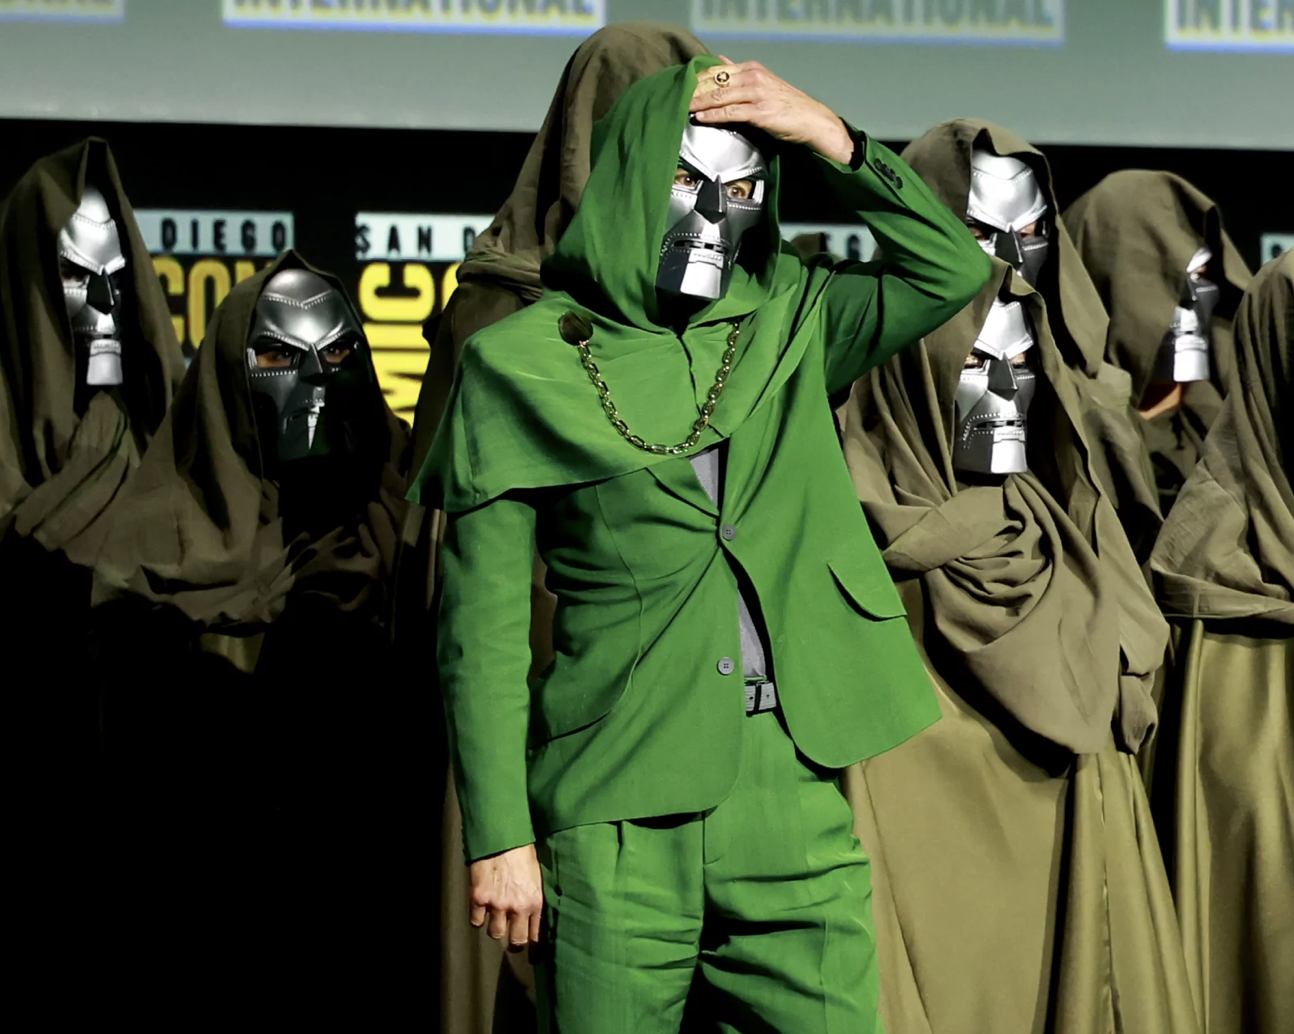 A man in a striking green suit and metal mask stands with a group of other people wearing metal masks and robes.